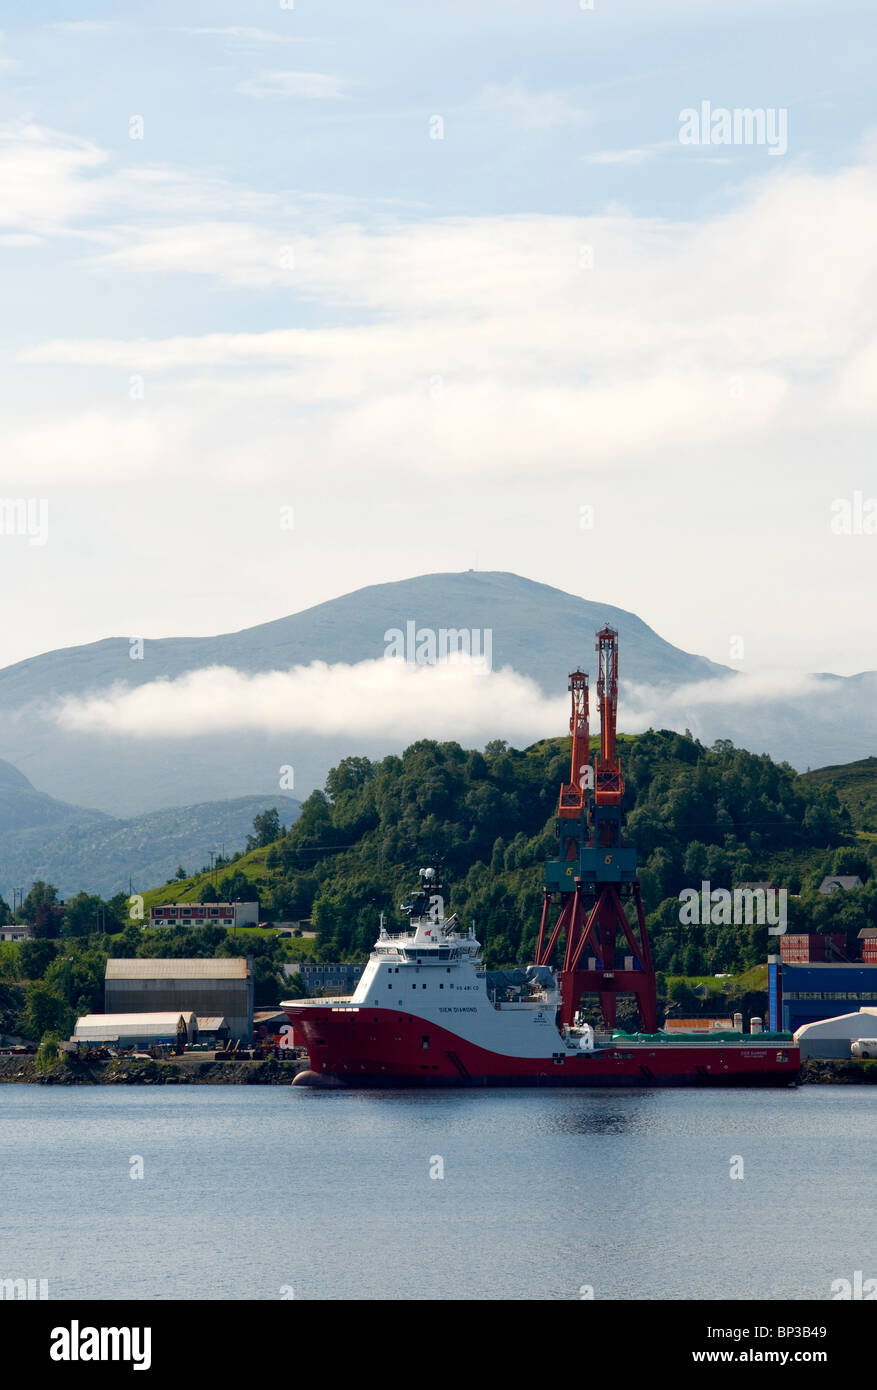 A ship being built at Ulsteinvik, Western Norway. Home of Rolls Royce and Ulstein shipyards.  Oil Well support vessel. Stock Photo